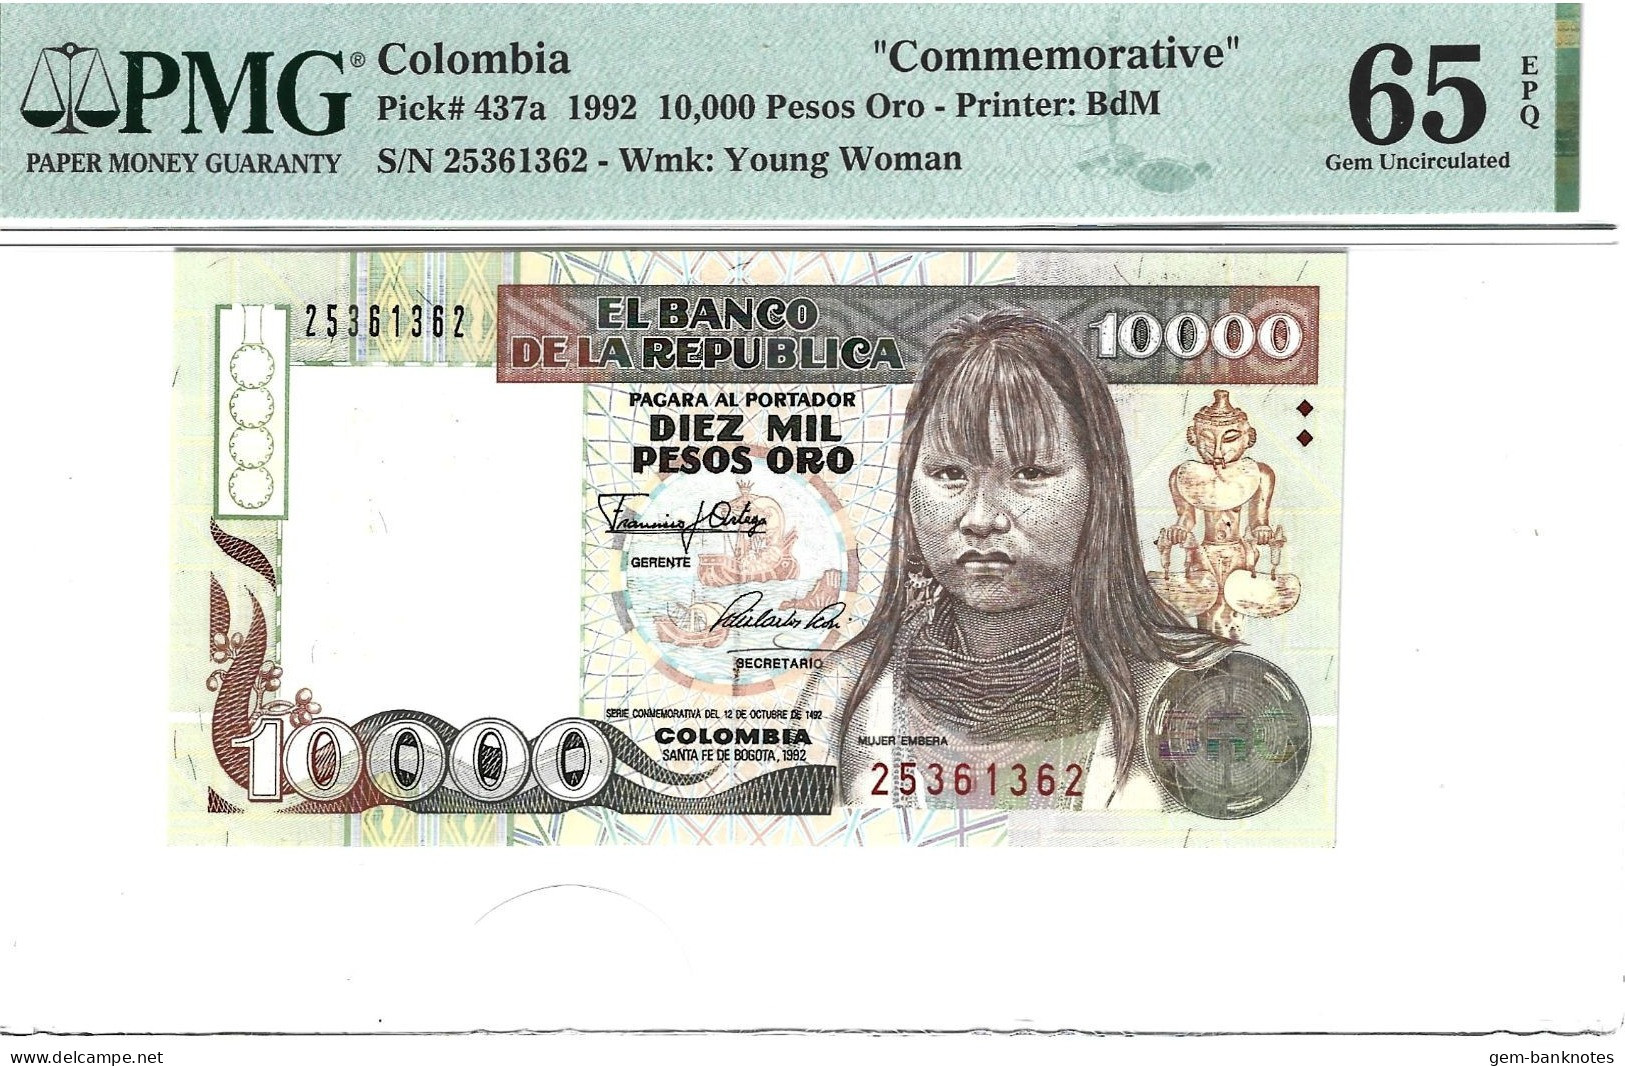 Colombia 10000 Pesos 1992 P437a Commemorative Graded 65 EPQ Gem Uncirculated By PMG - Colombia